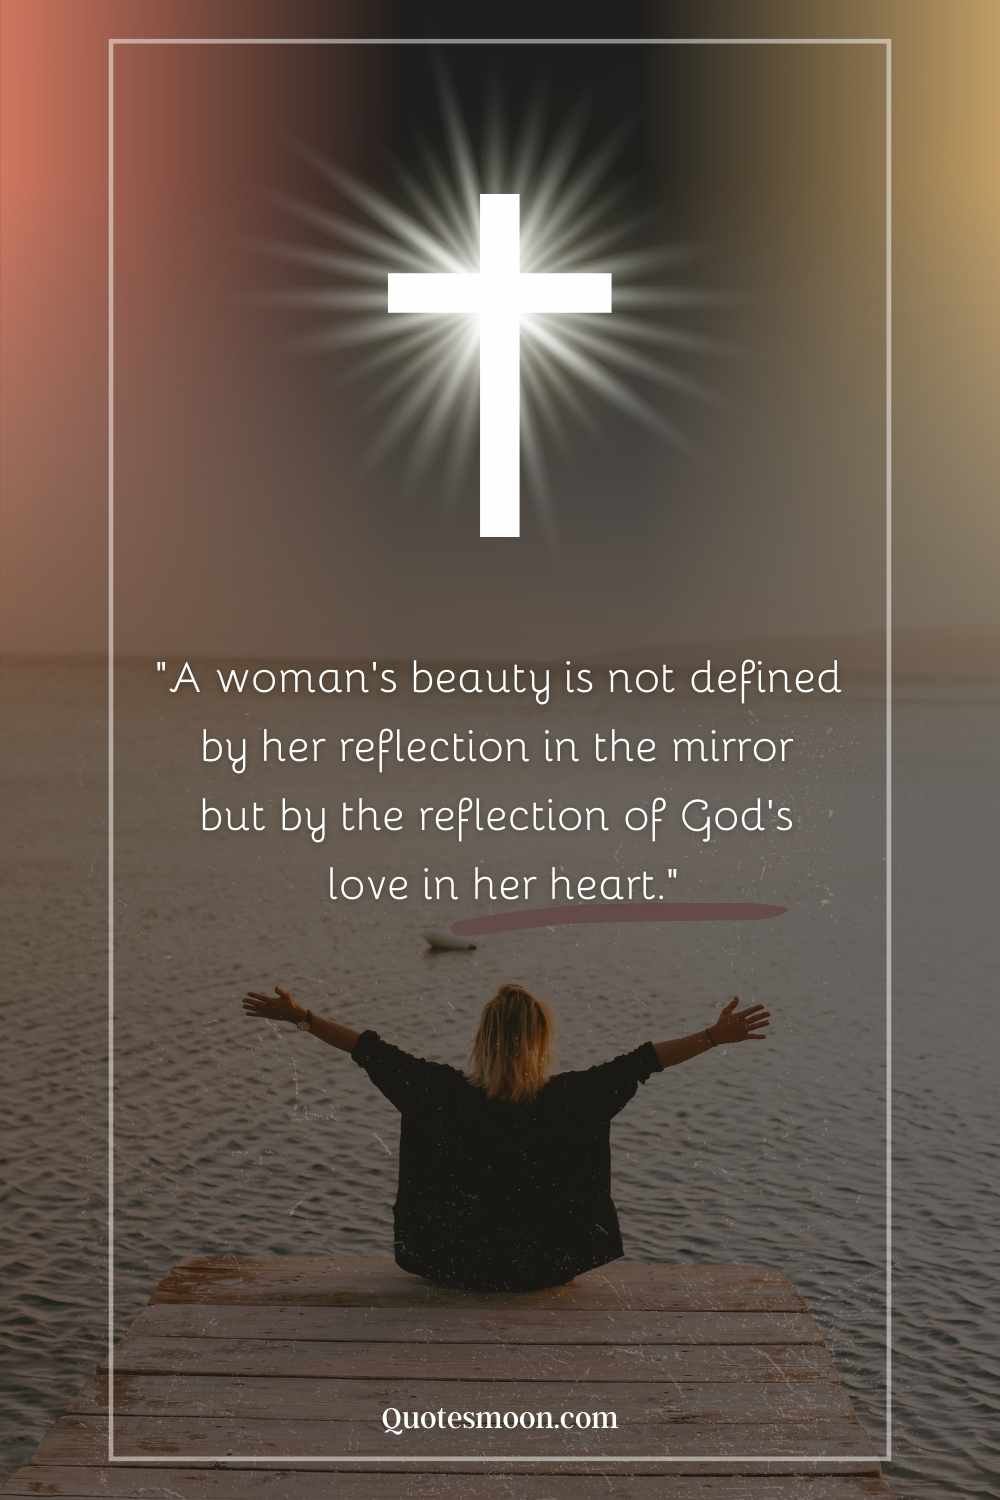 Christian Quotes To Light The Path For Women pics HD